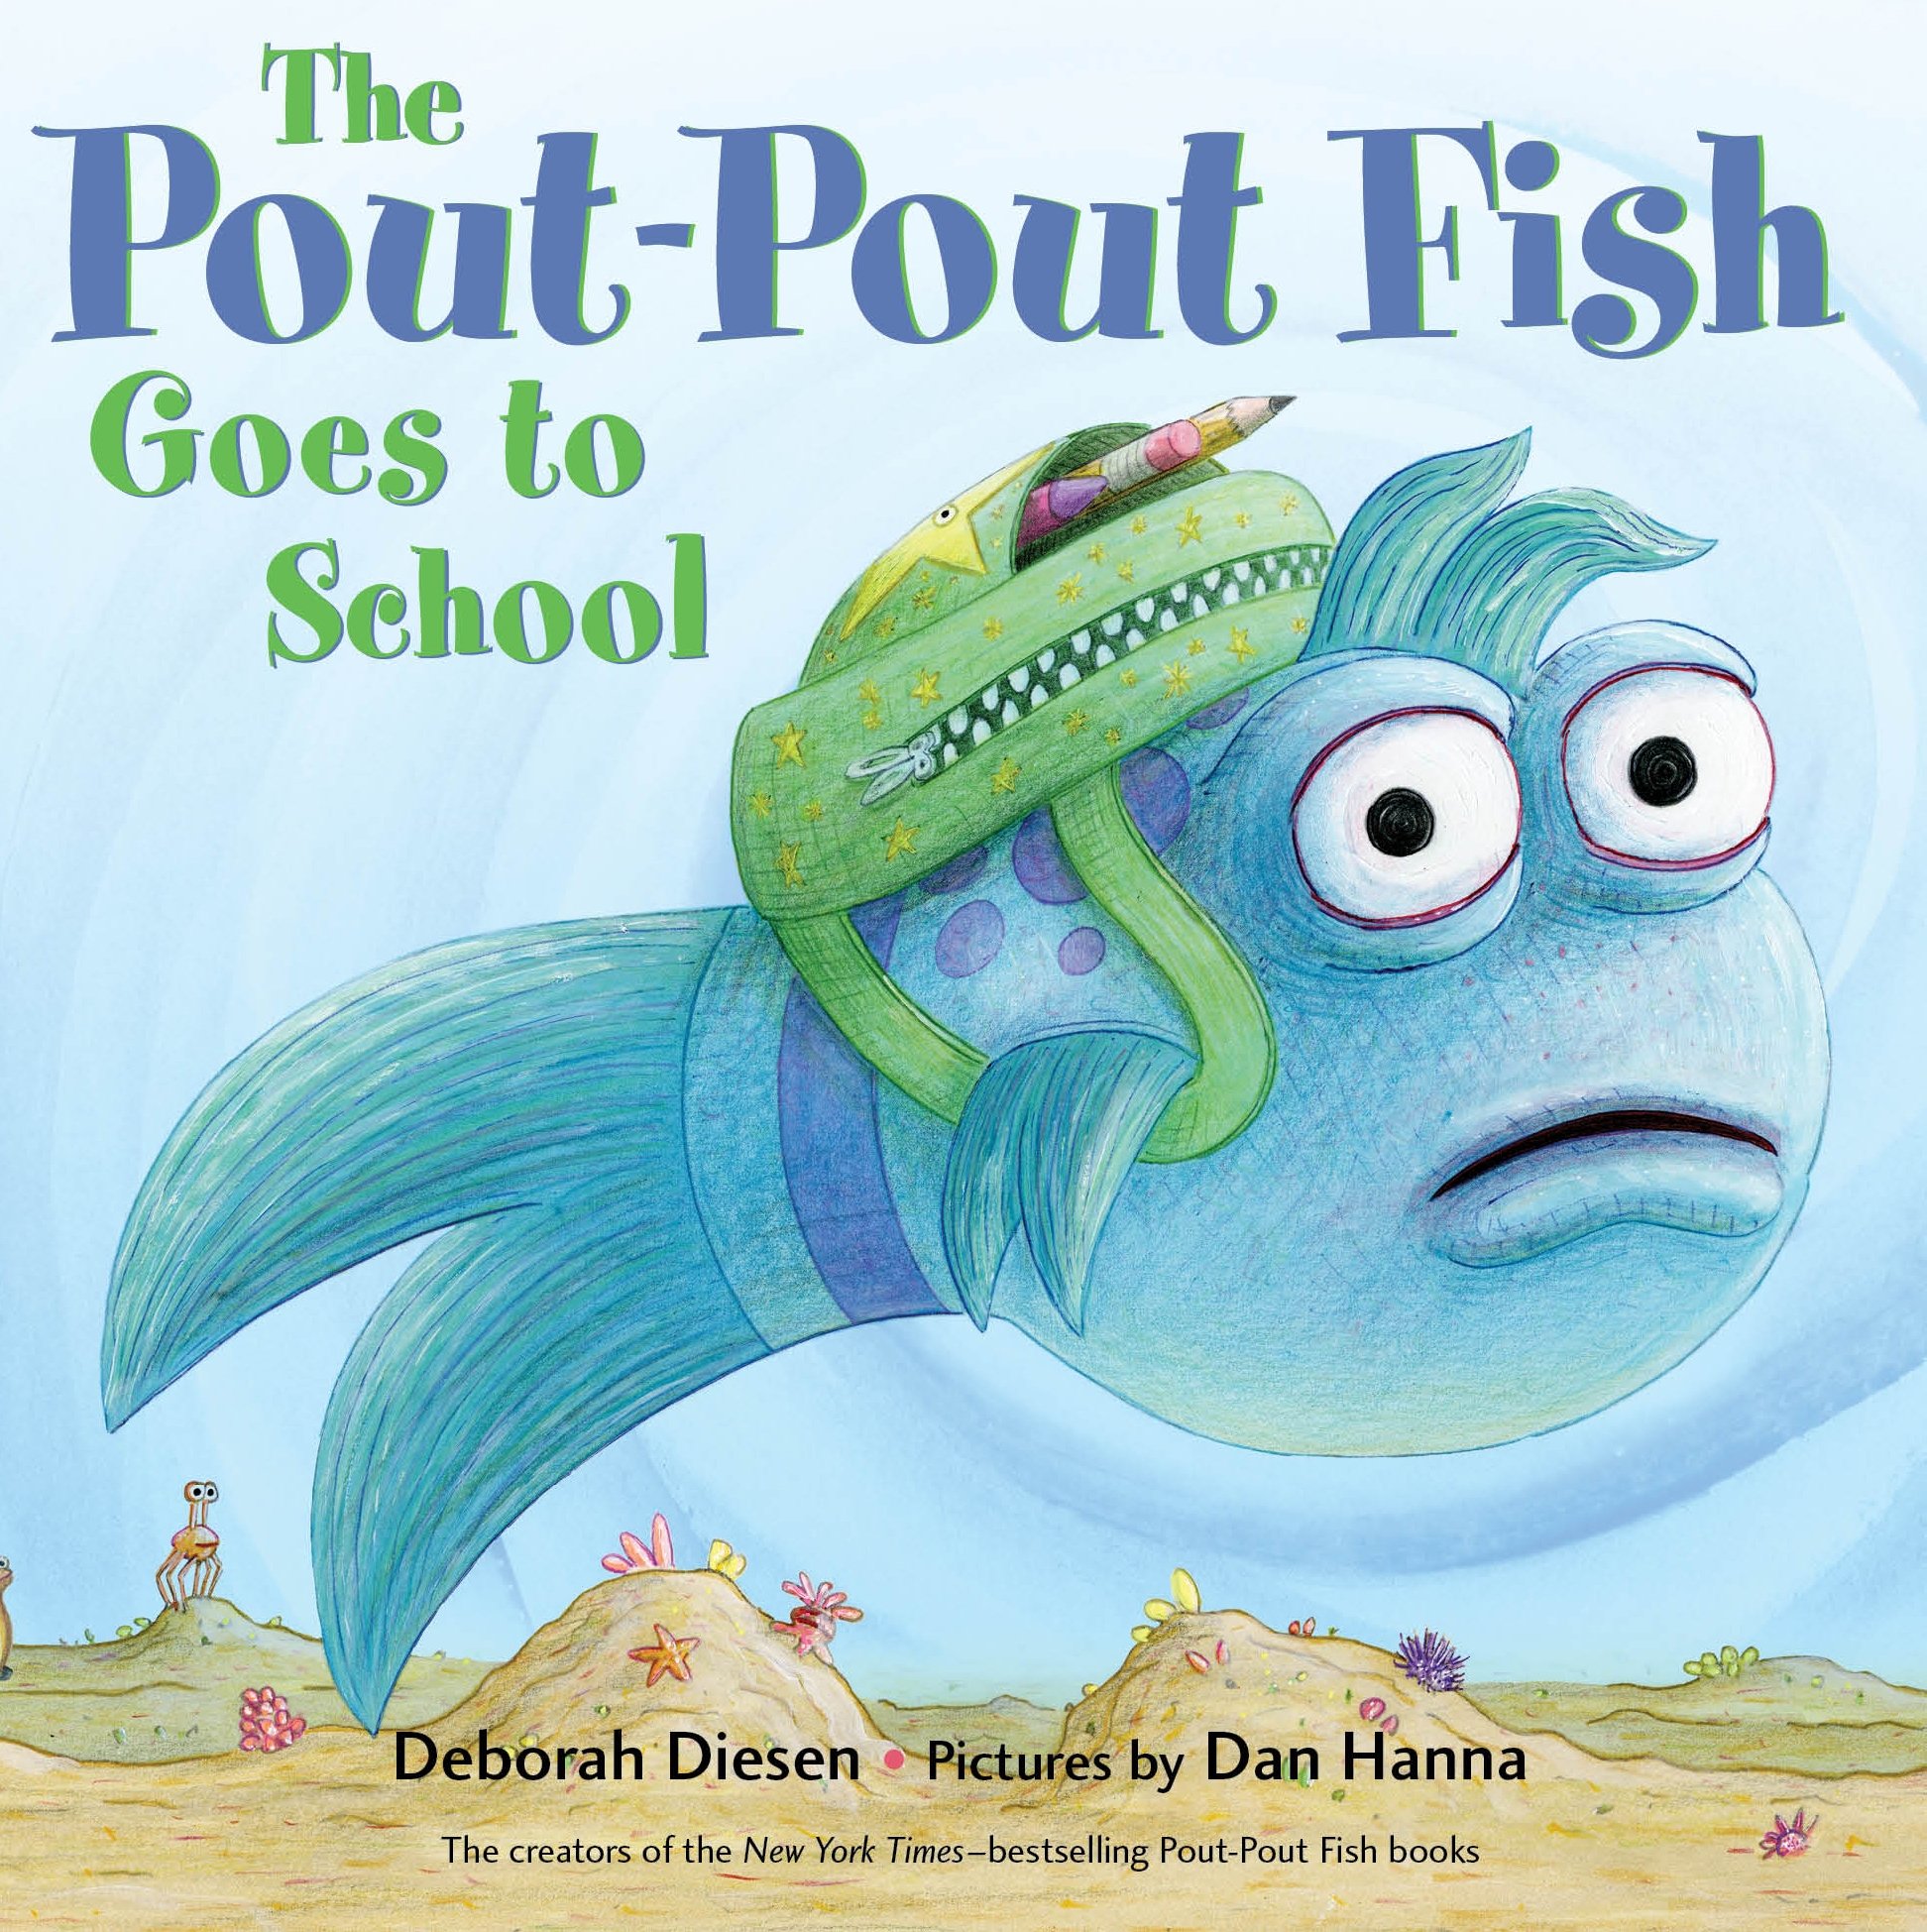 speech and language teaching concepts for The Pout-Pout Fish Goes To School in speech therapy